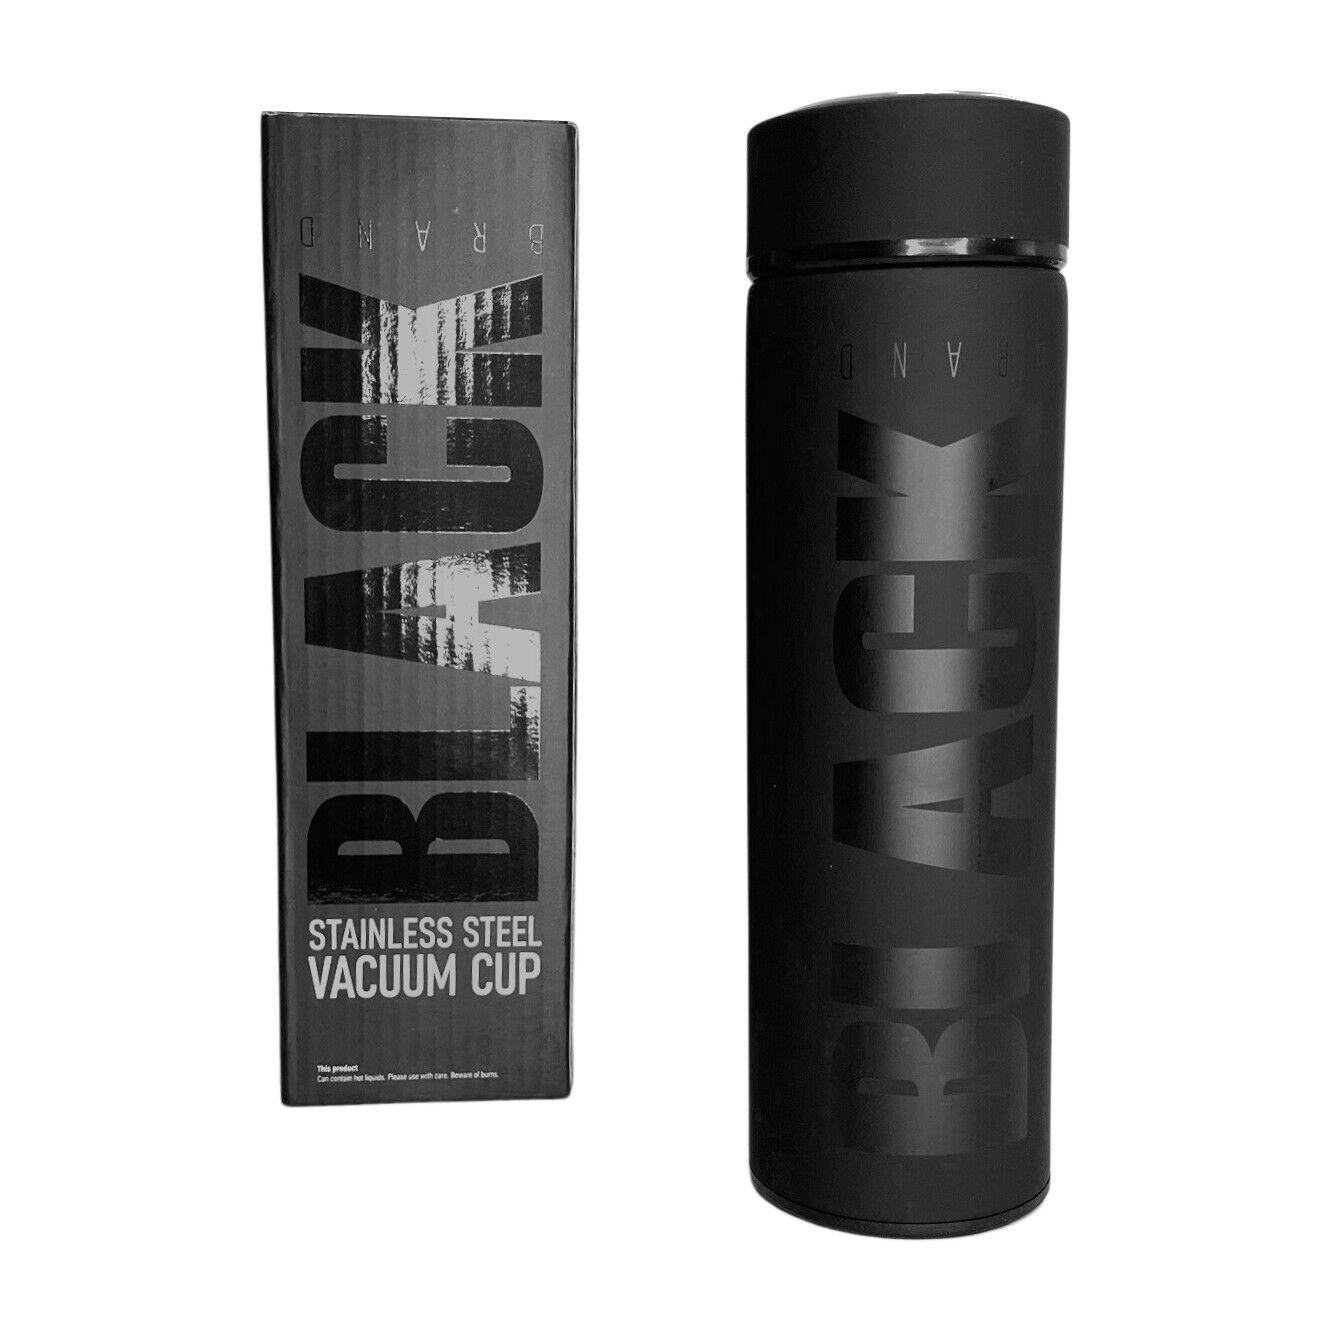 16 oz Vacuum Sealed Steel Thermos Insulated Coffee Cup Travel Mug By BLACK BRAND